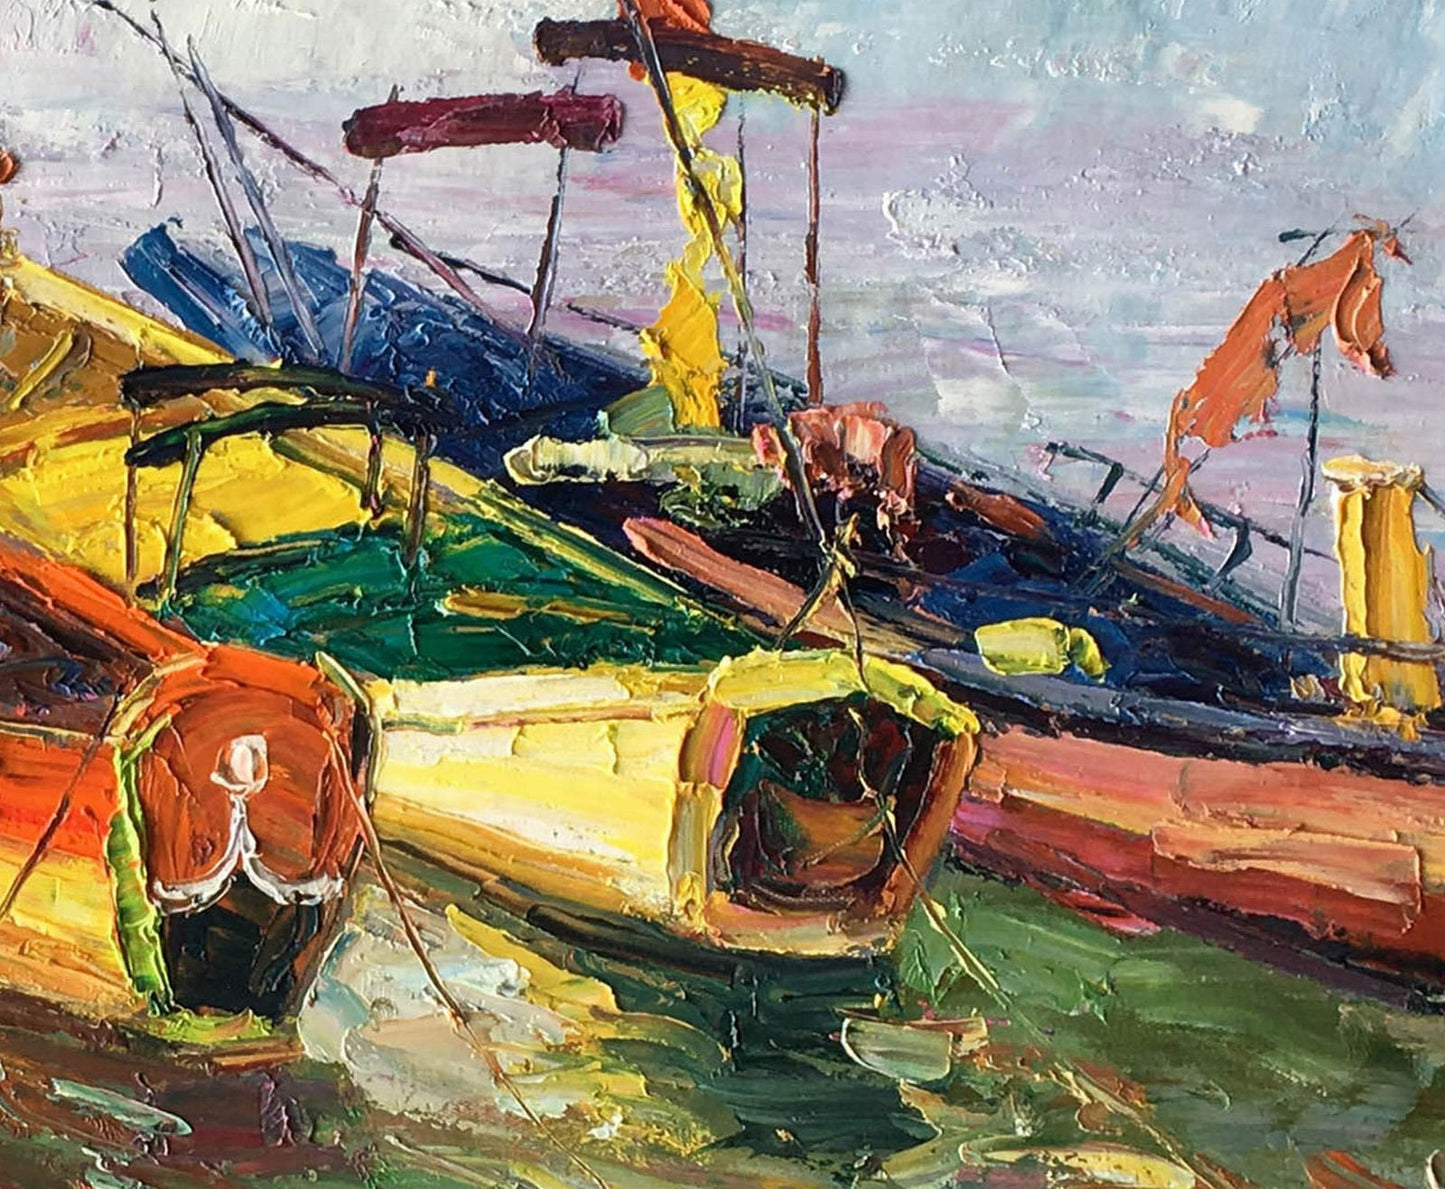 Original Oil Painting Fishing Boats Moored By The Sea, Wall Art Painting, Oversized Painting, Handmade Art, Contemporary, Texture Painting